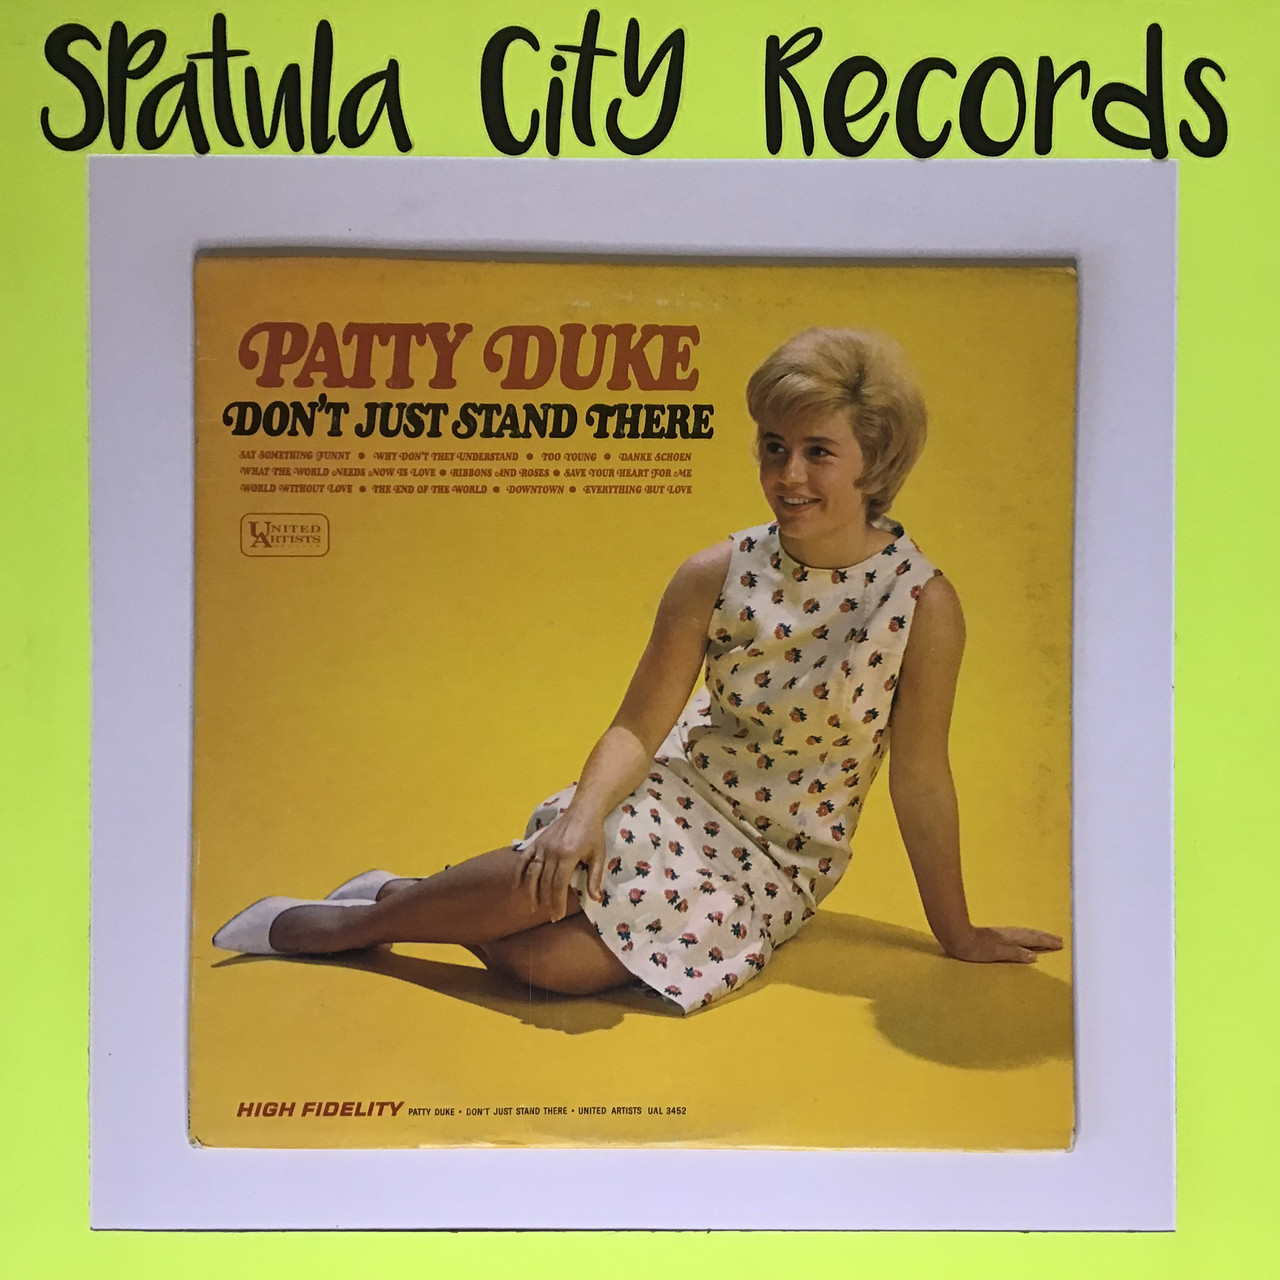 Patty Duke - Don't Just Stand There - MONO - vinyl record LP